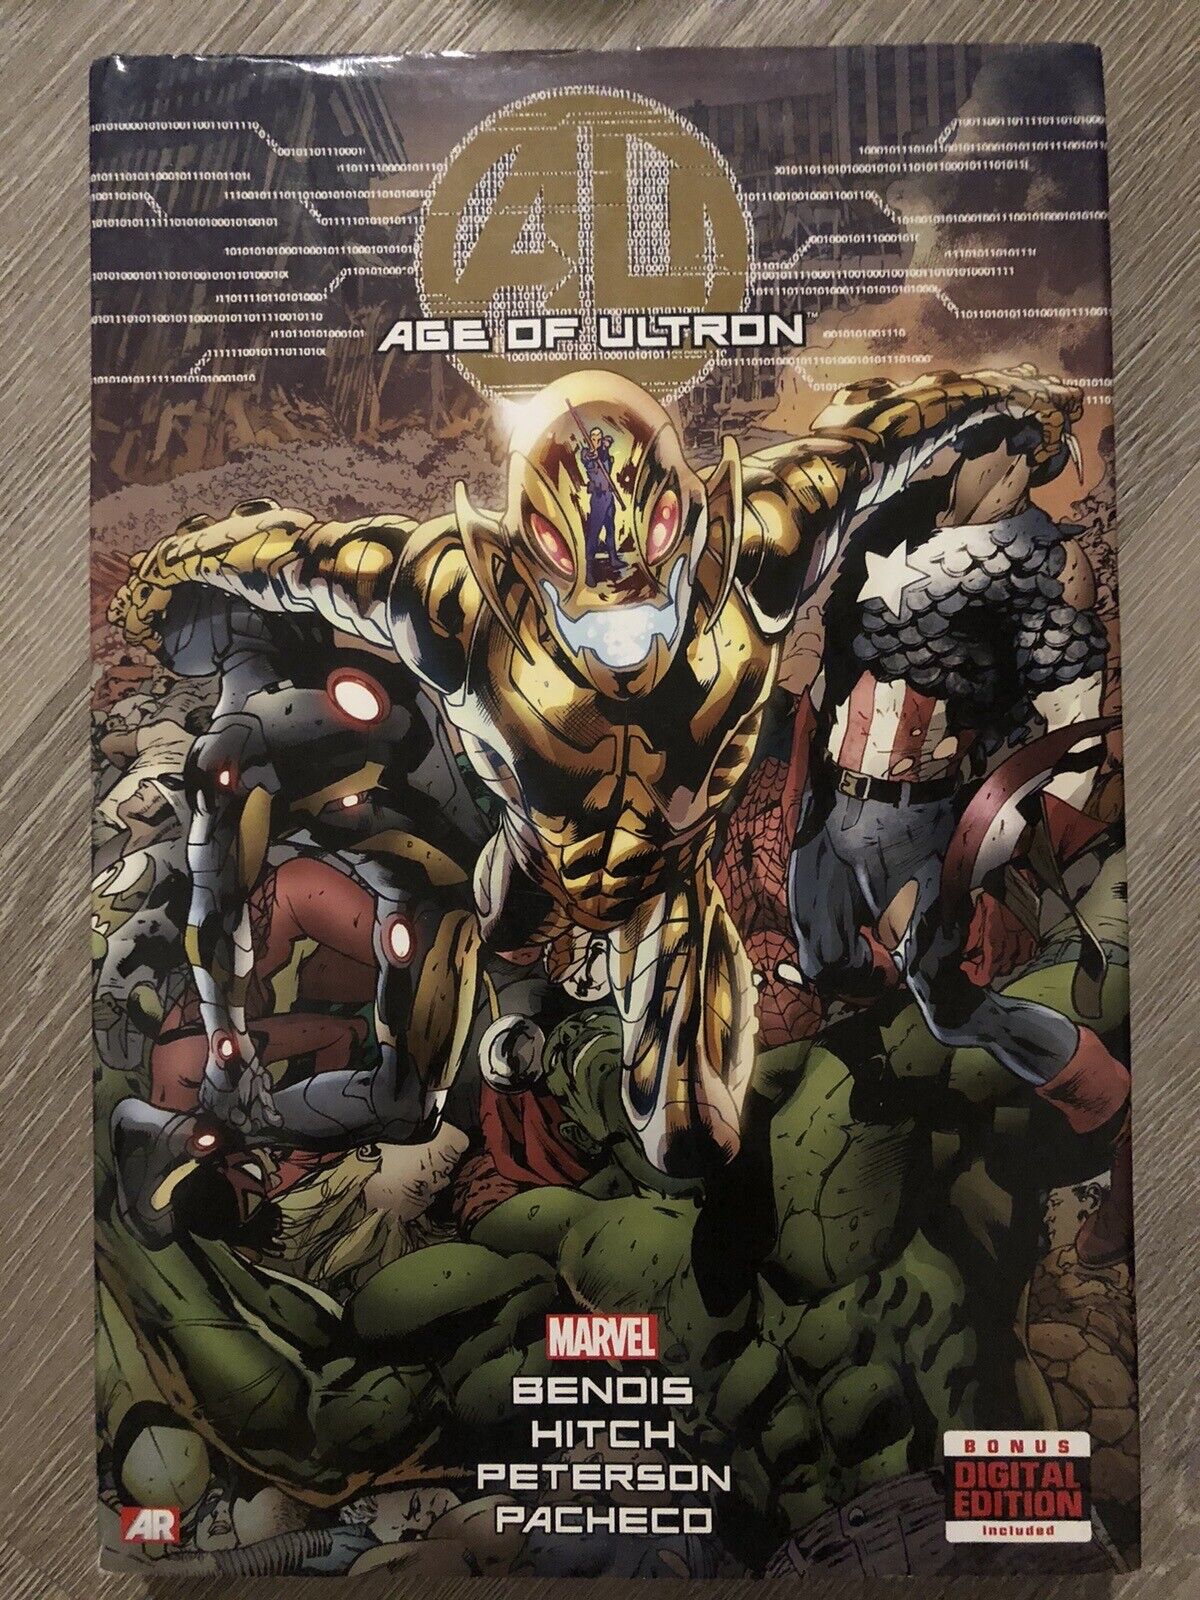 Marvel Age Of Ultron (2013) By Bendis Hitch Peterson Pacheco Hardcover